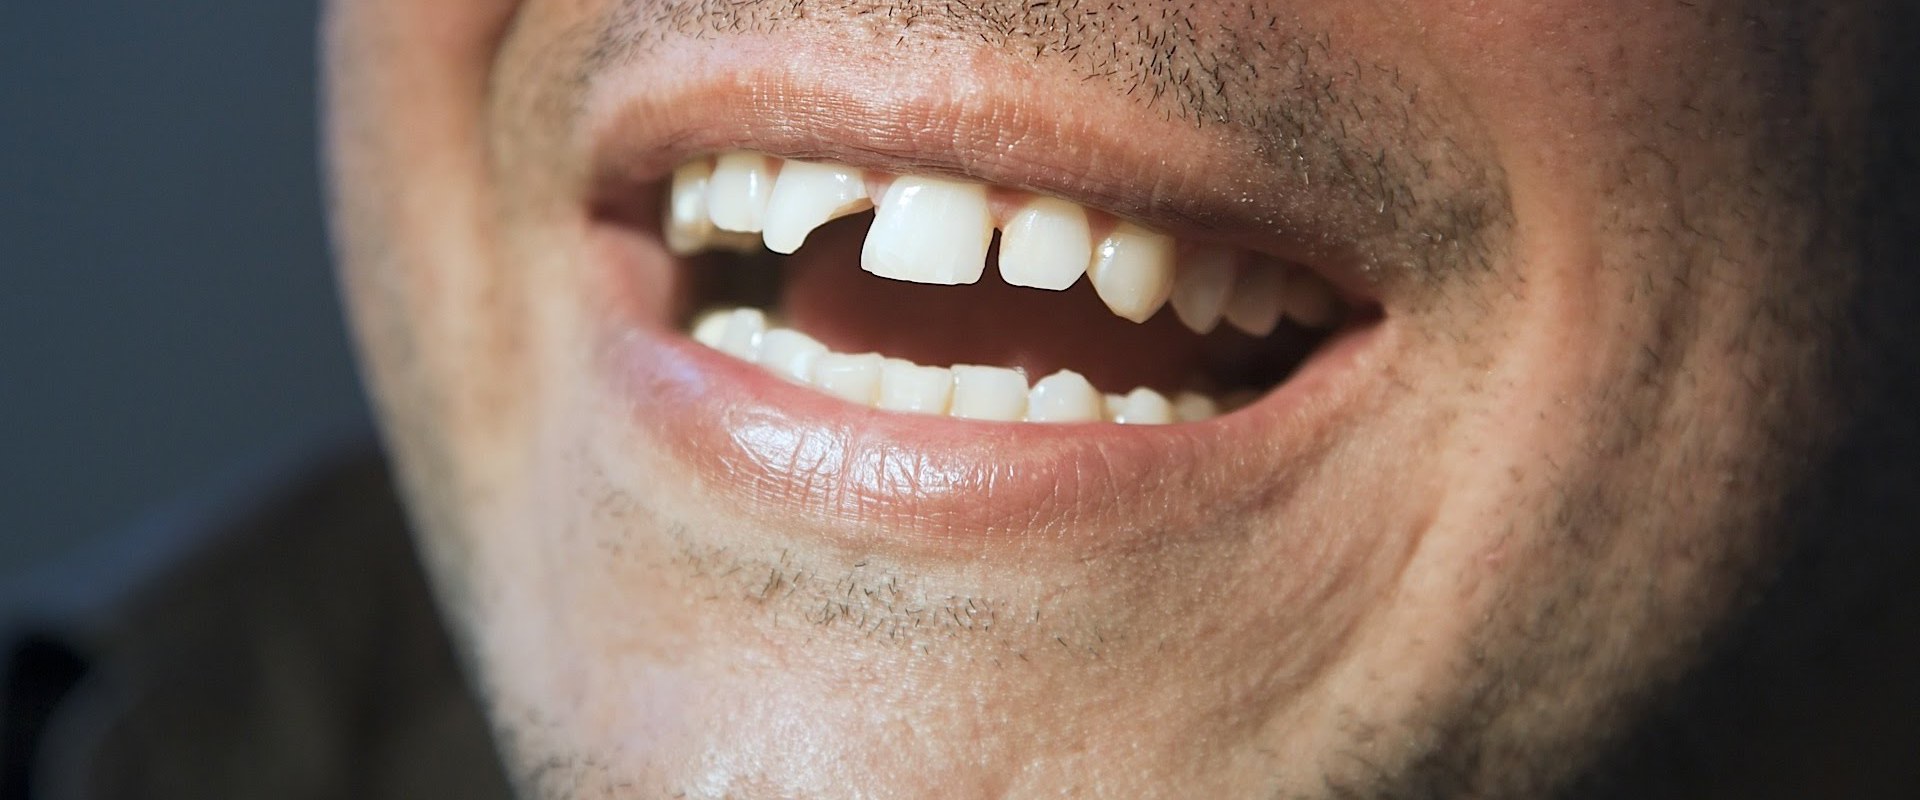 Is a Chipped Tooth Serious? Expert Advice on Treatment and Prevention